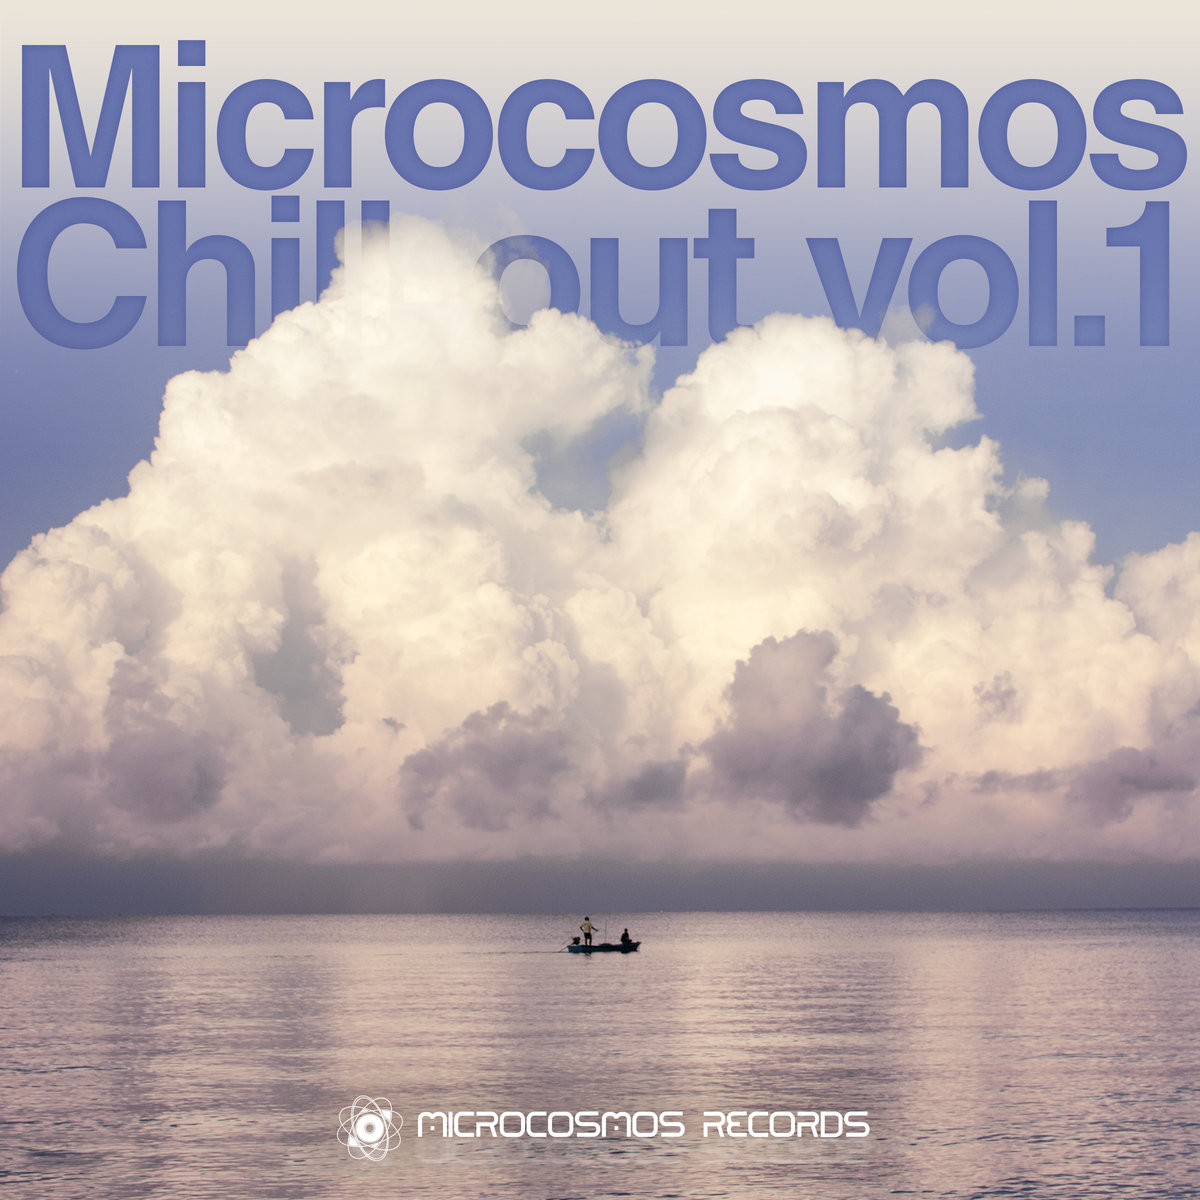 By The Rain & Suduaya - Sagesse @ 'Various Artists - Microcosmos Chill-out Vol.1' album (ambient, chill-out)